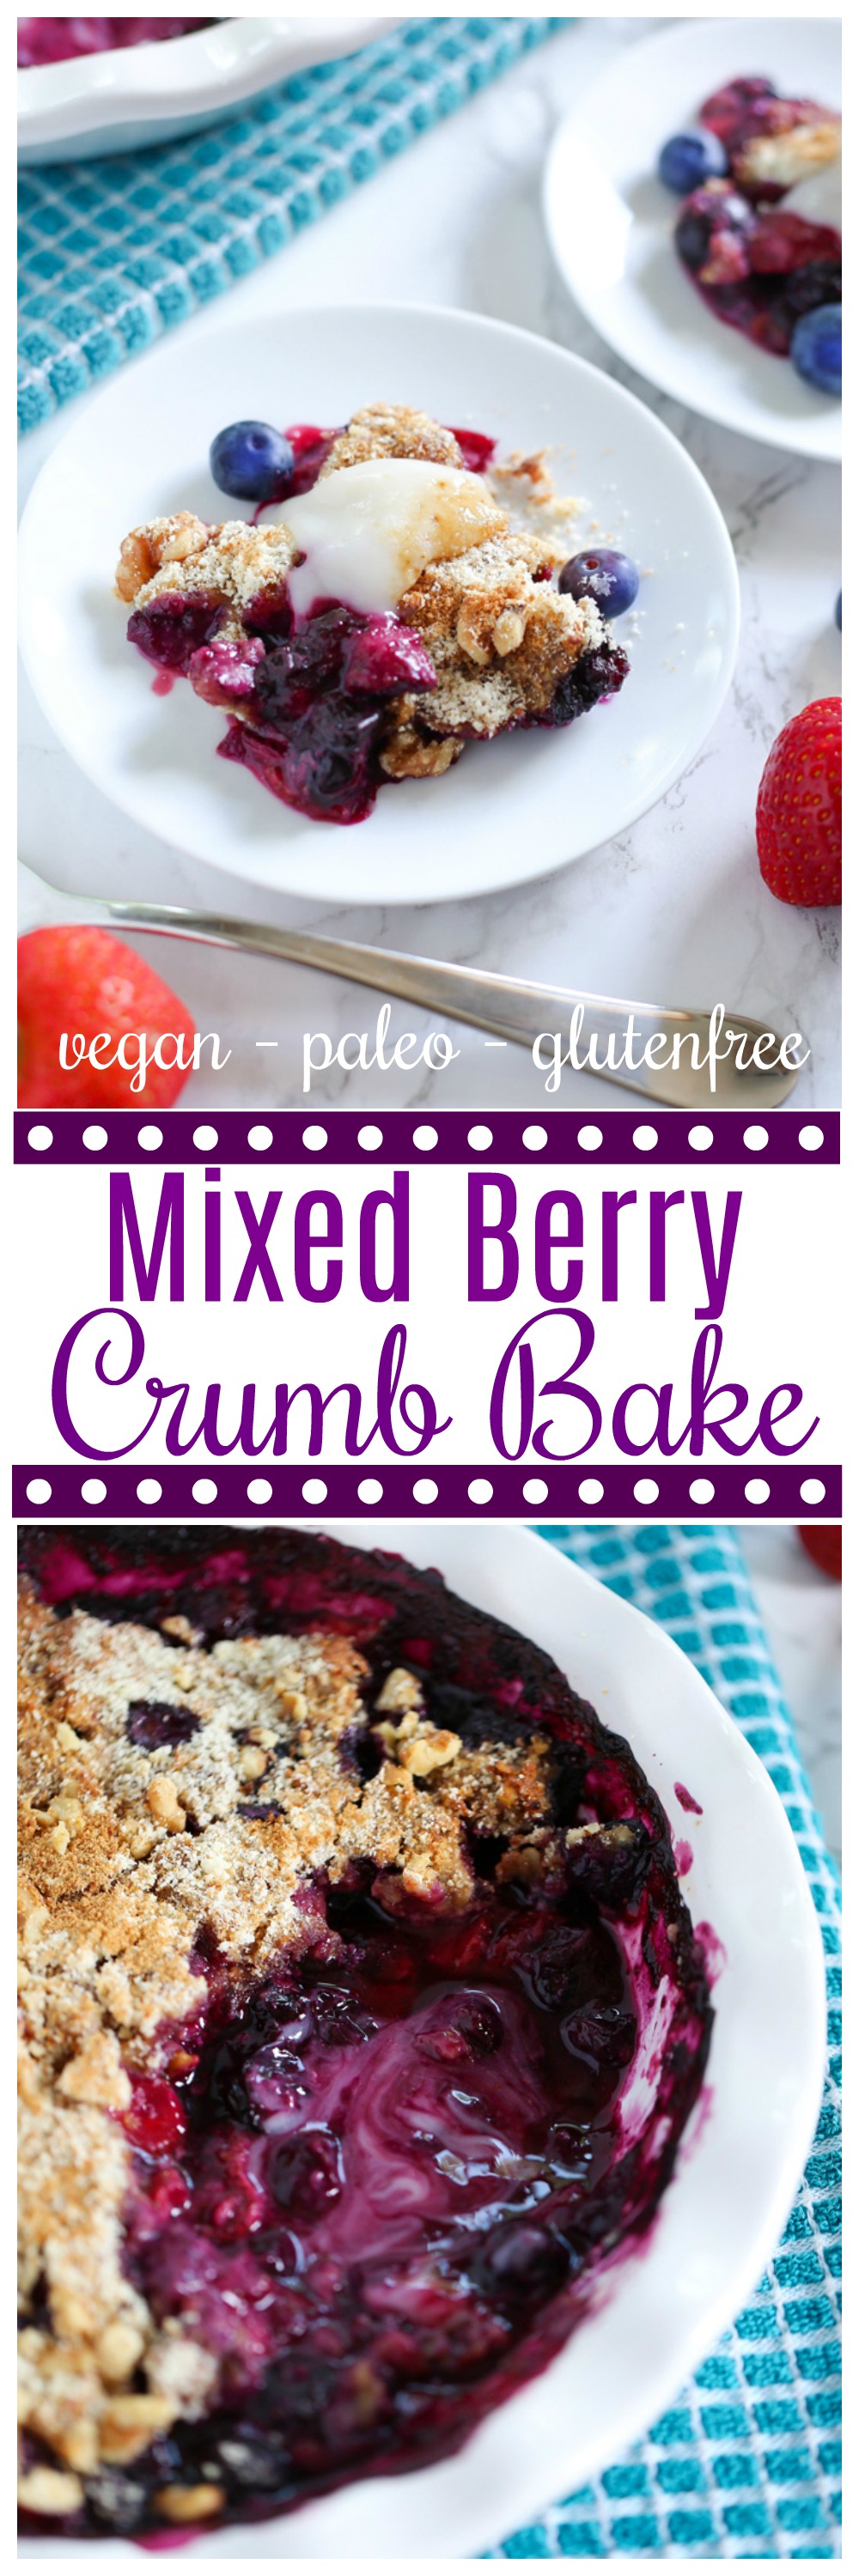 Mixed Berry Crumb Bake - This berry rich breakfast can be made as a healthy quick dessert too! Highly nutritious, naturally sweet, vegan and gluten free! NeuroticMommy.com #vegan #glutenfree #paleo